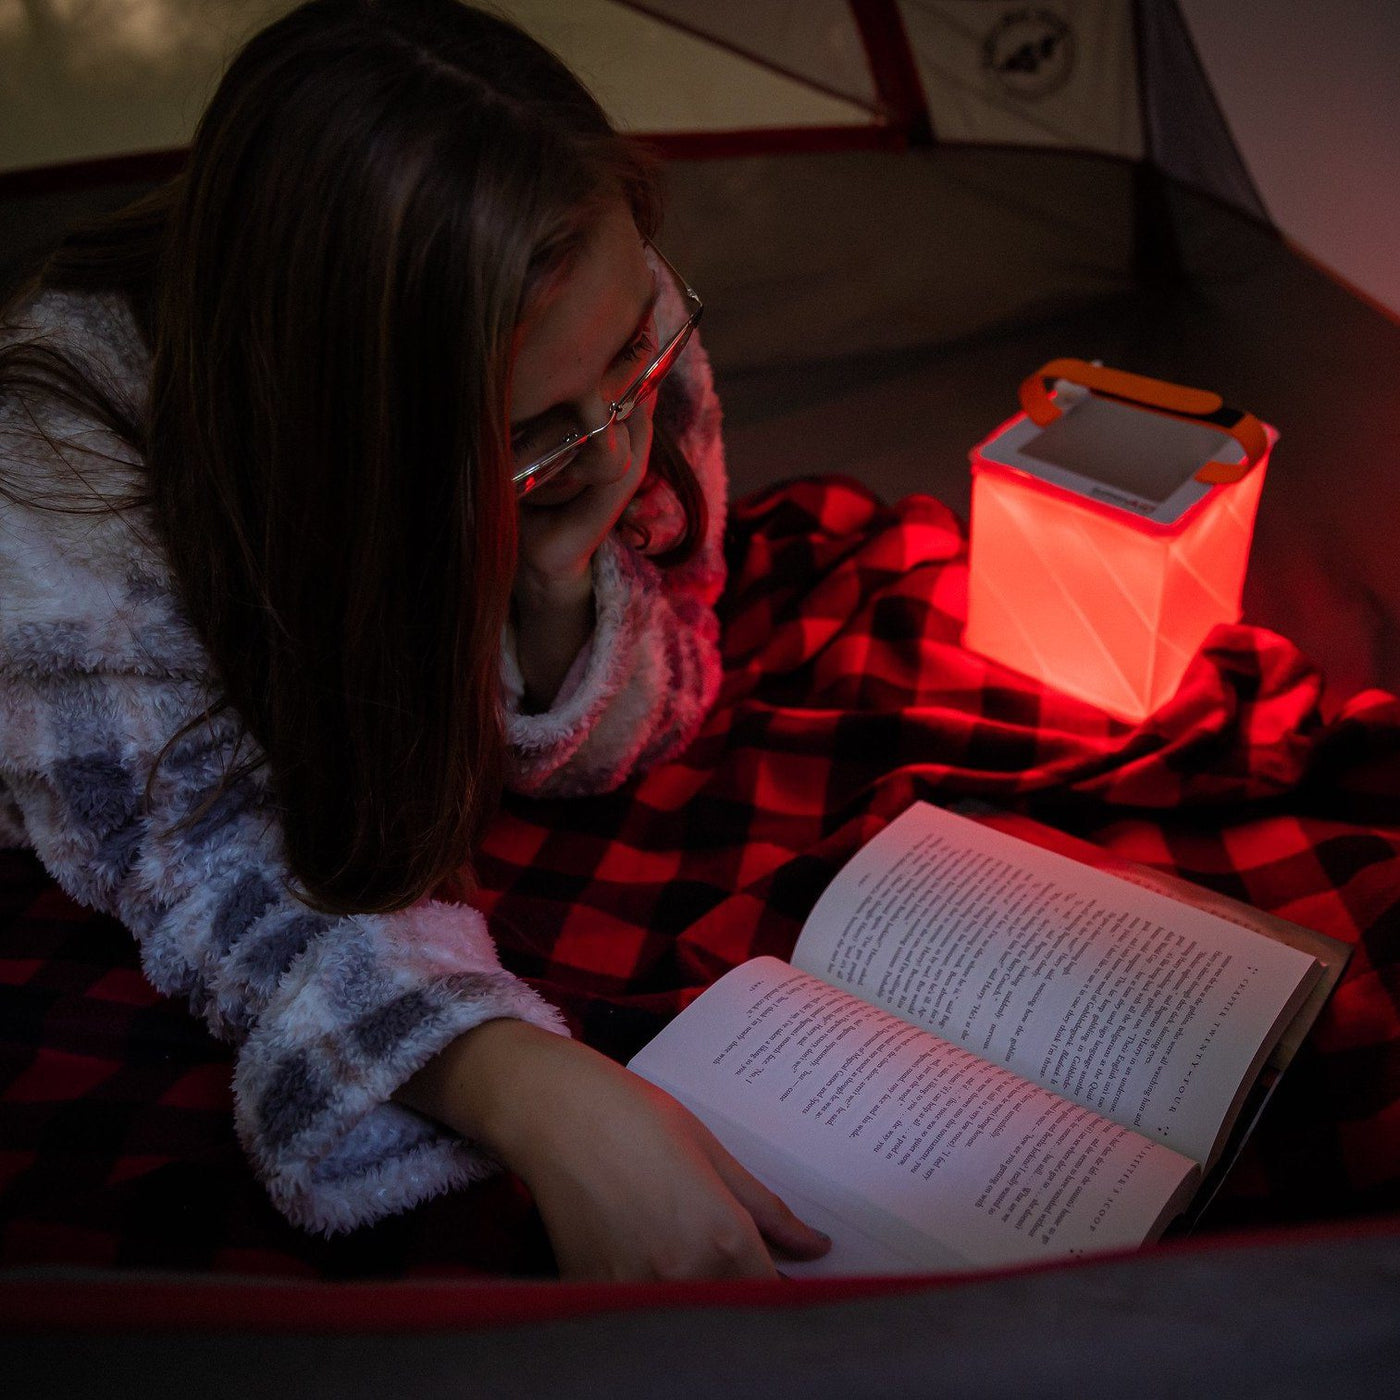 Woman reading using red light mode in her tent.